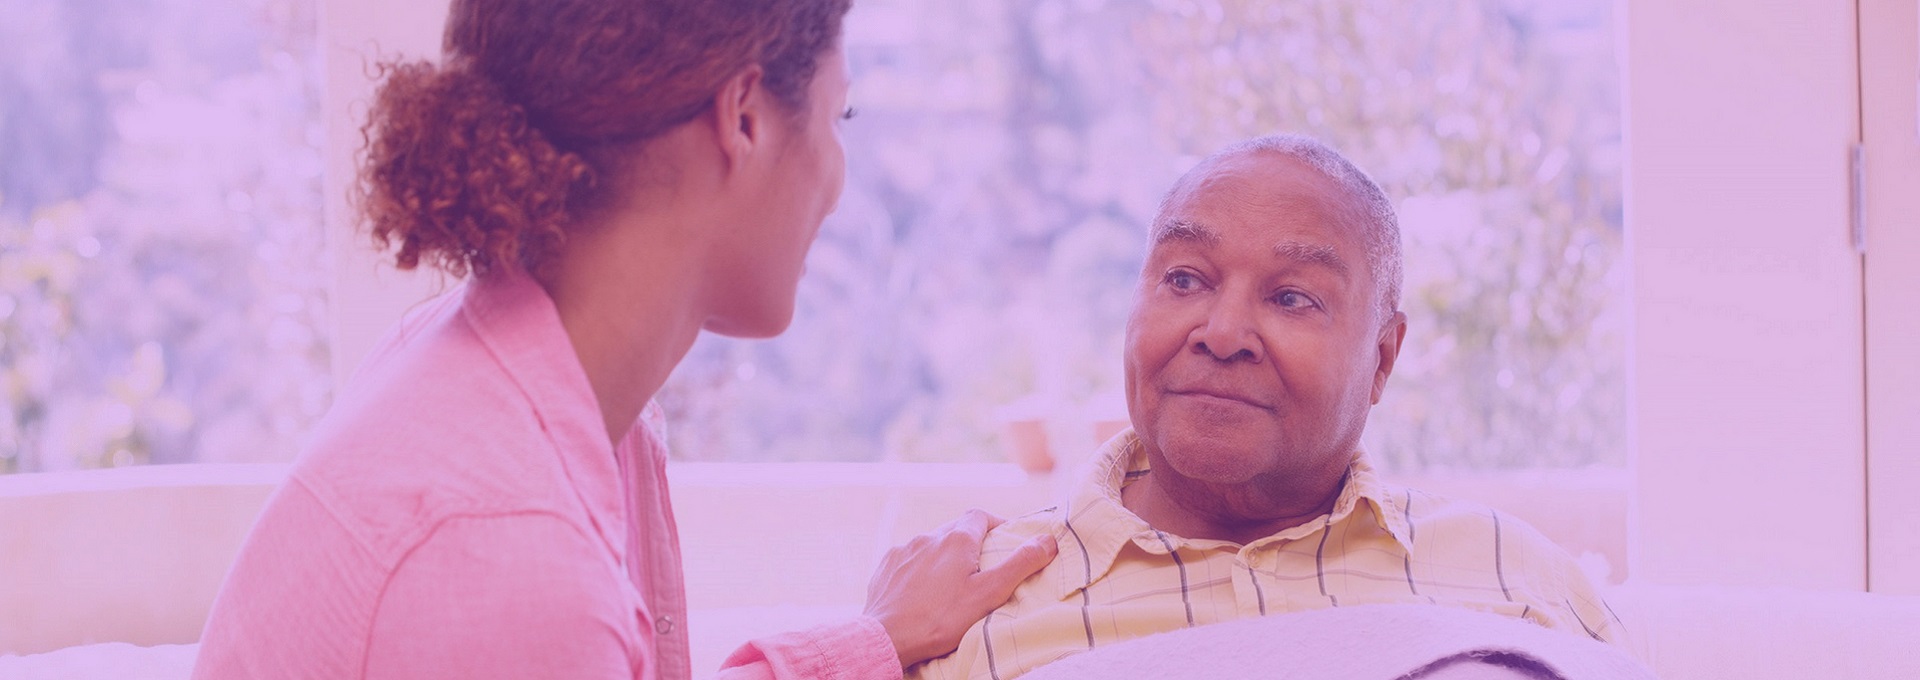 Become an Independent Home Care Provider